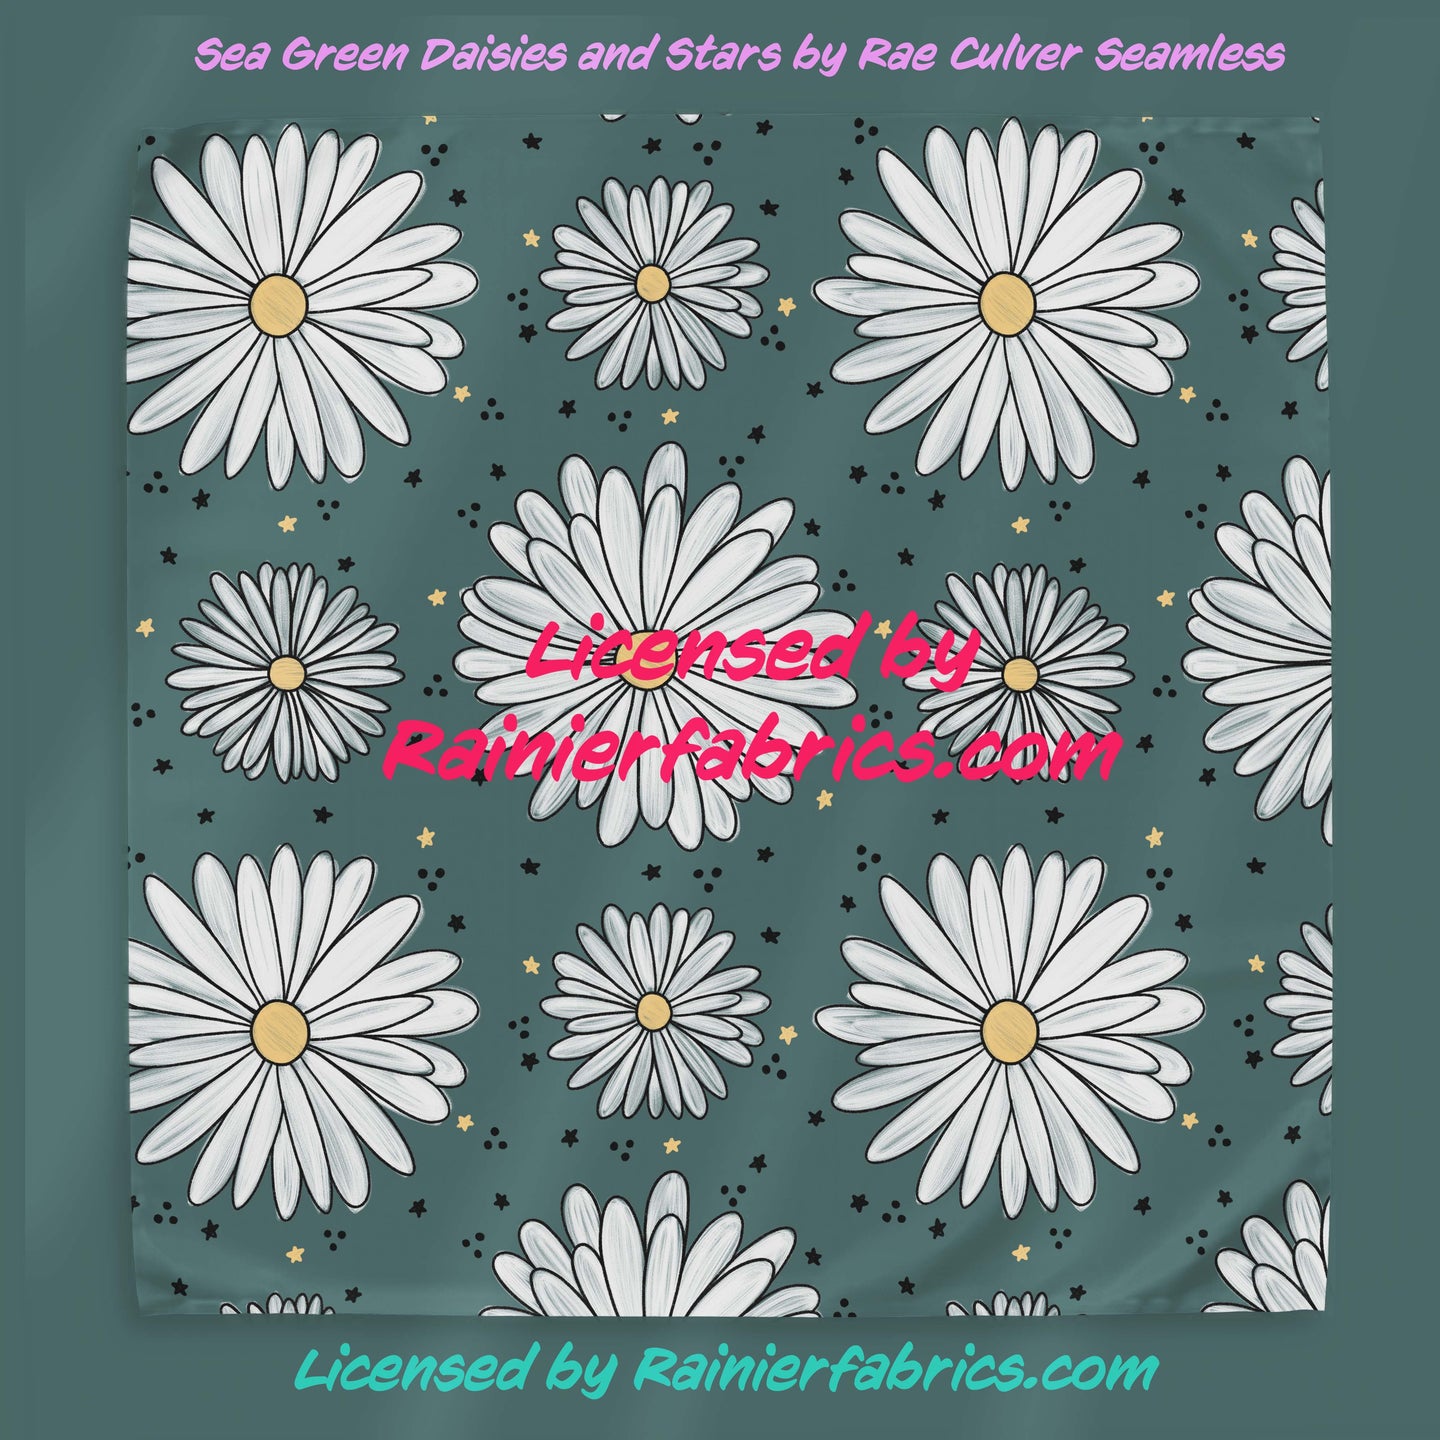 Sea Green Daisies and Stars by Rae Culver Seamless - 2-5 business days to ship - Order by 1/2 yard